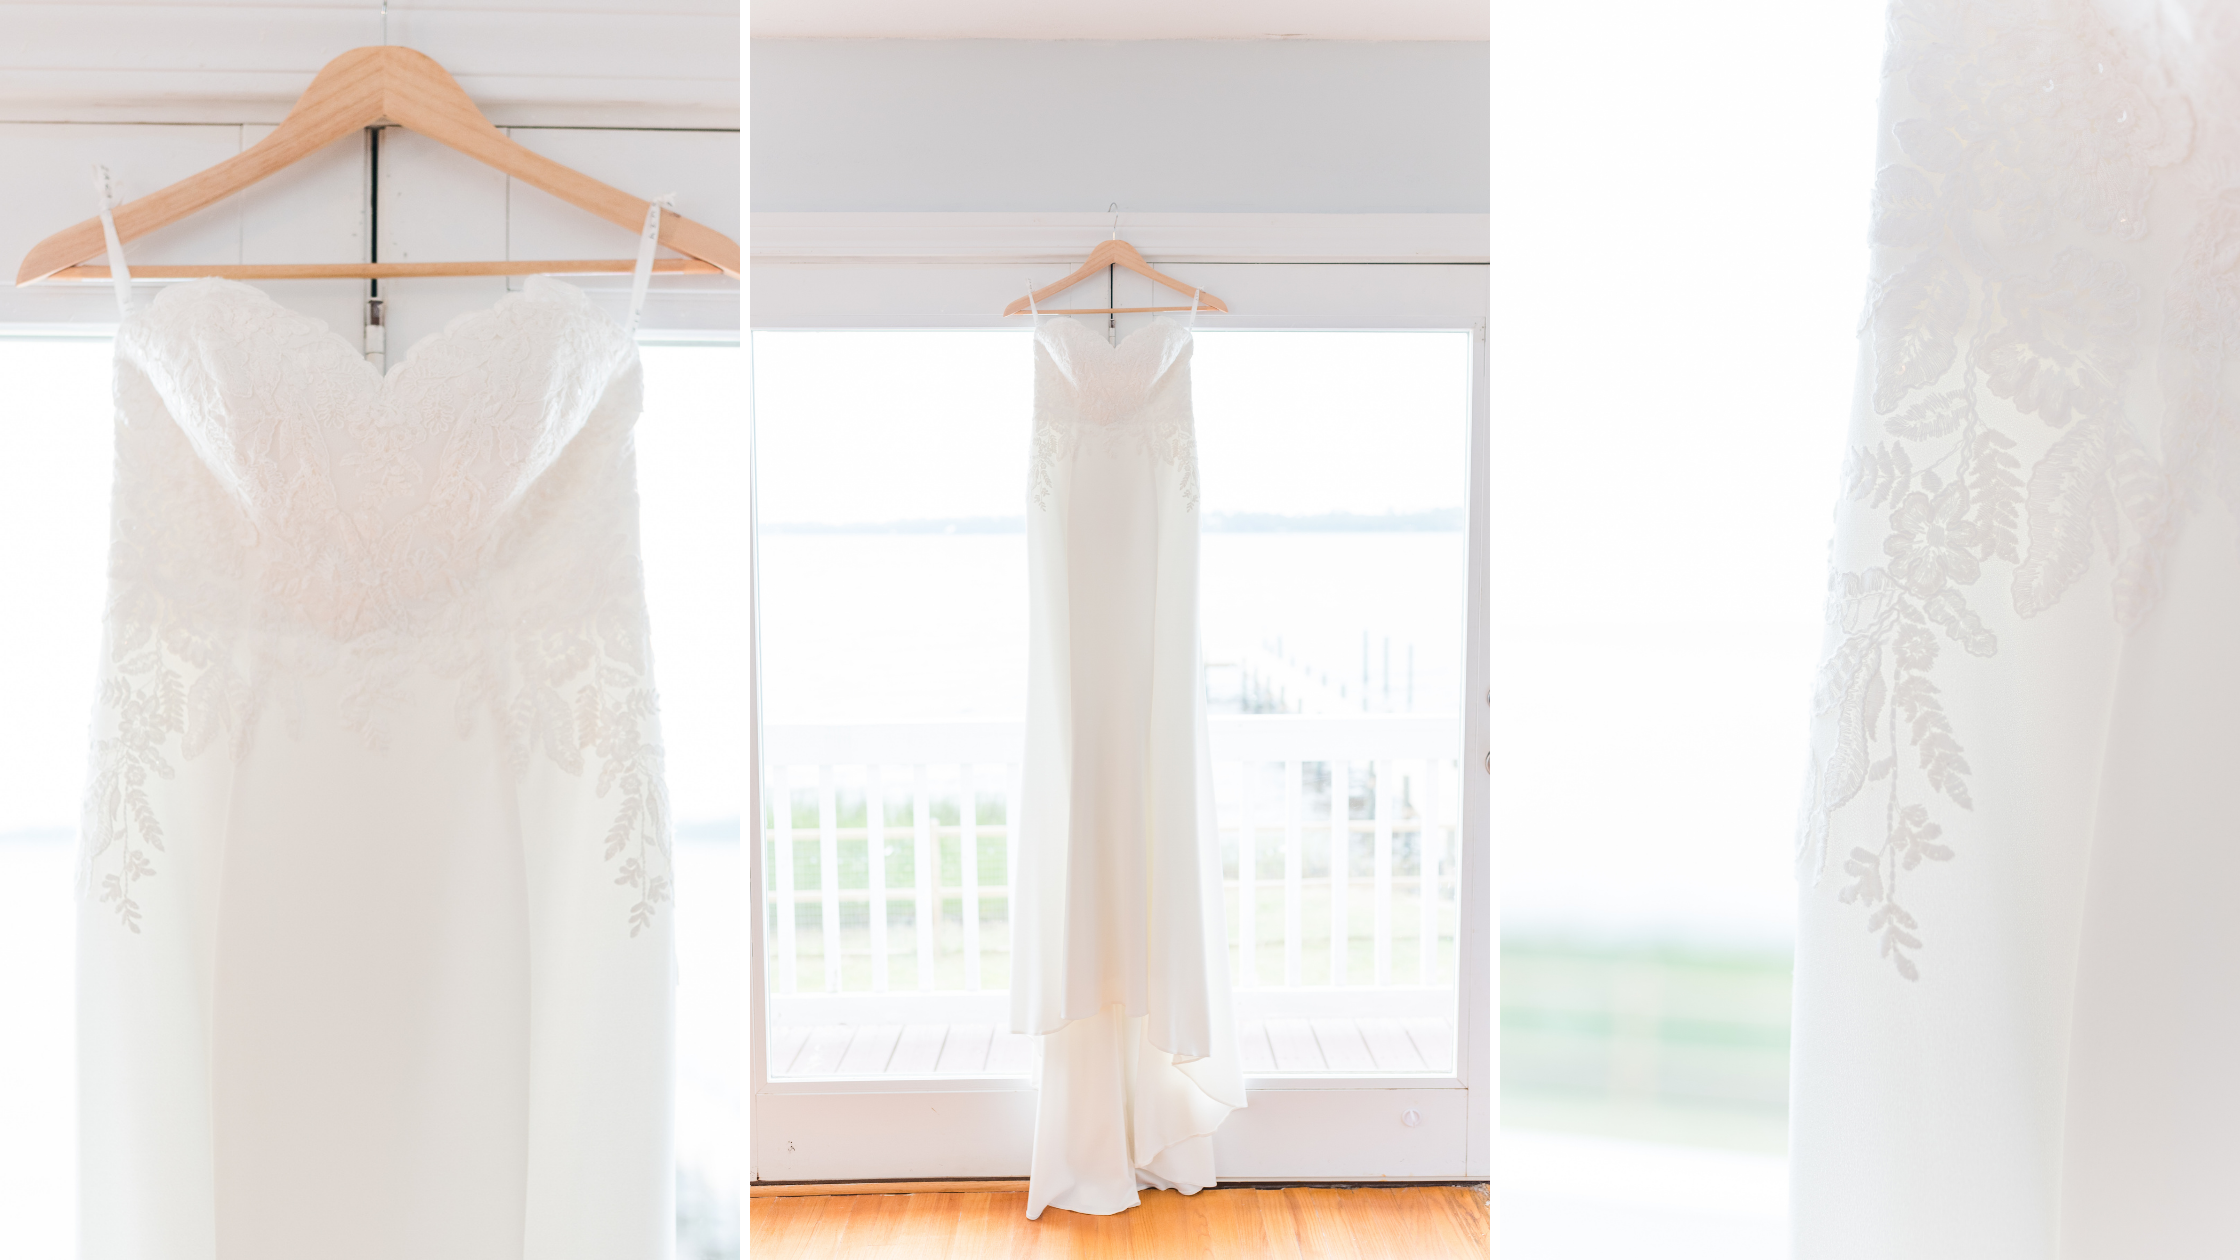 July Orange Beach Wedding Details Photographed by Kristen Marcus Photography